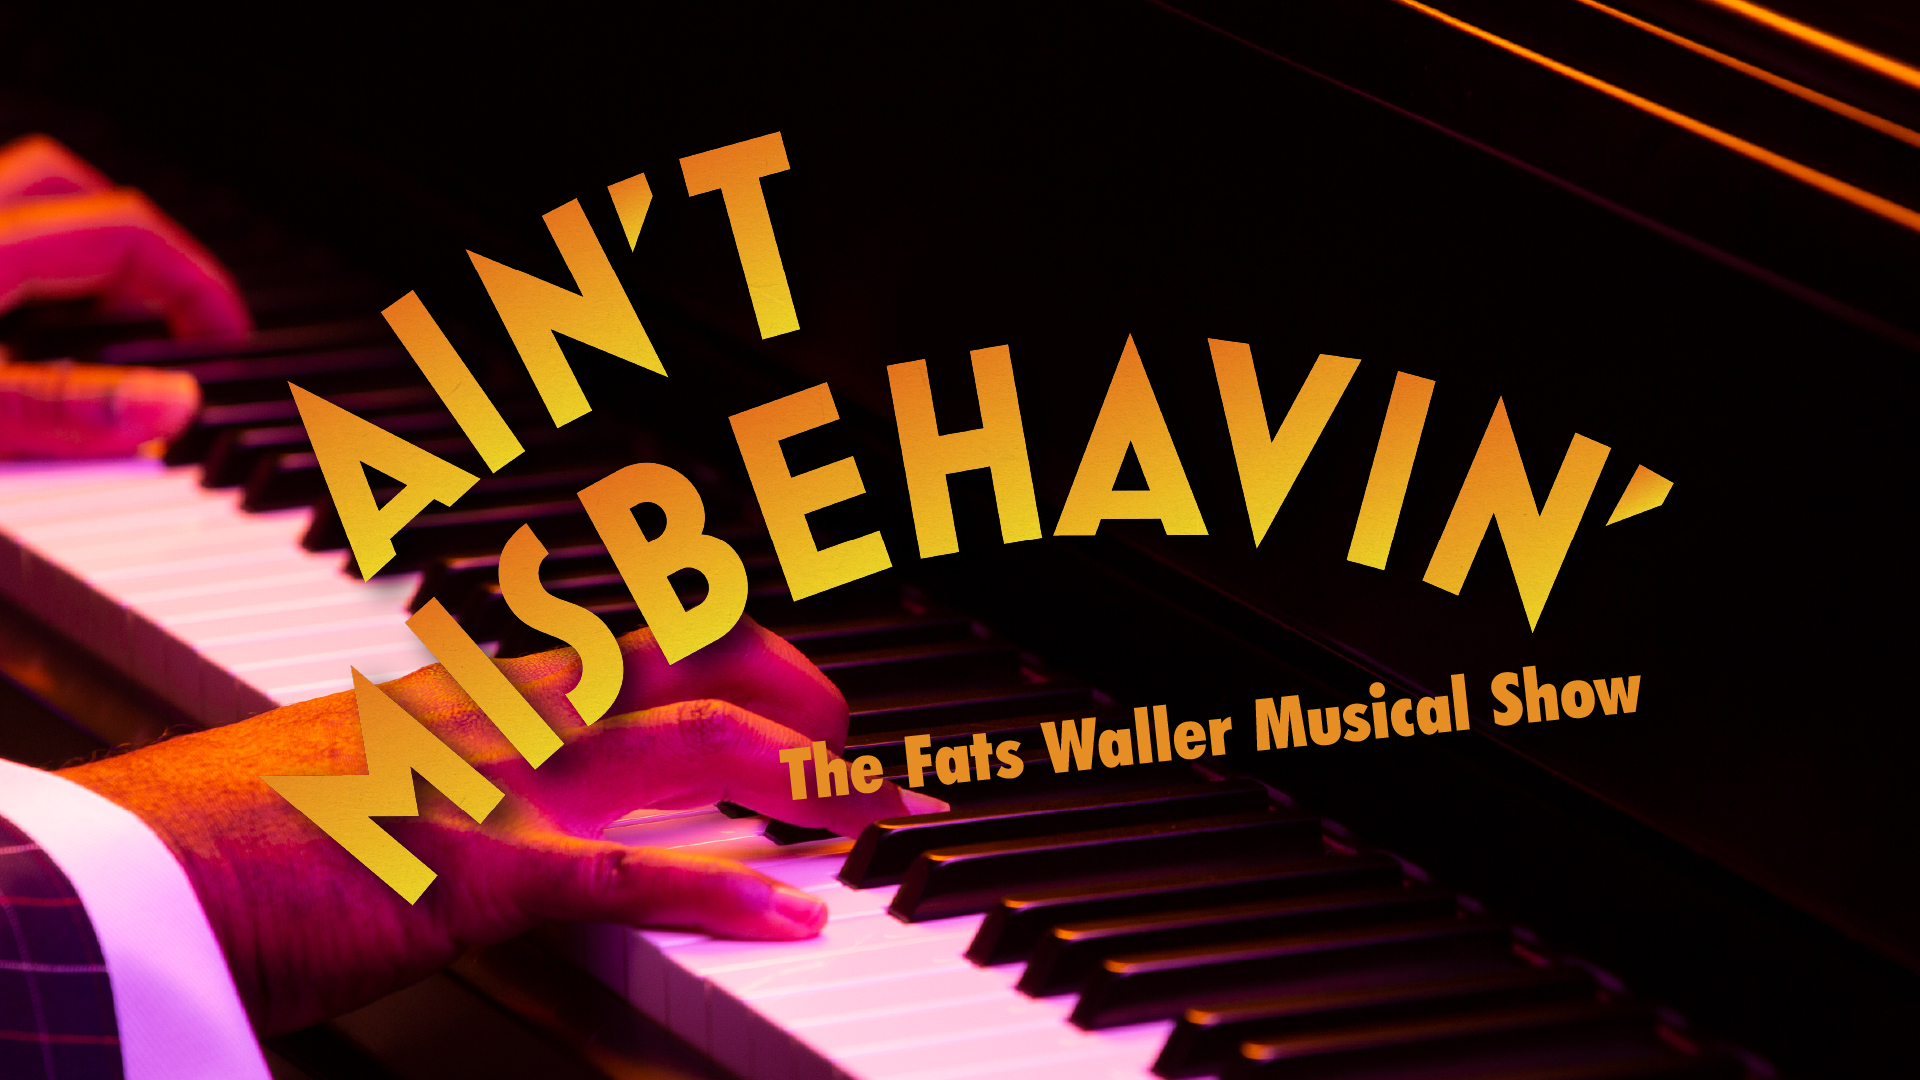 Ain't Misbehavin' logo graphic featuring an art deco font over a photo of hands at piano keys bathed in a rich pink light.